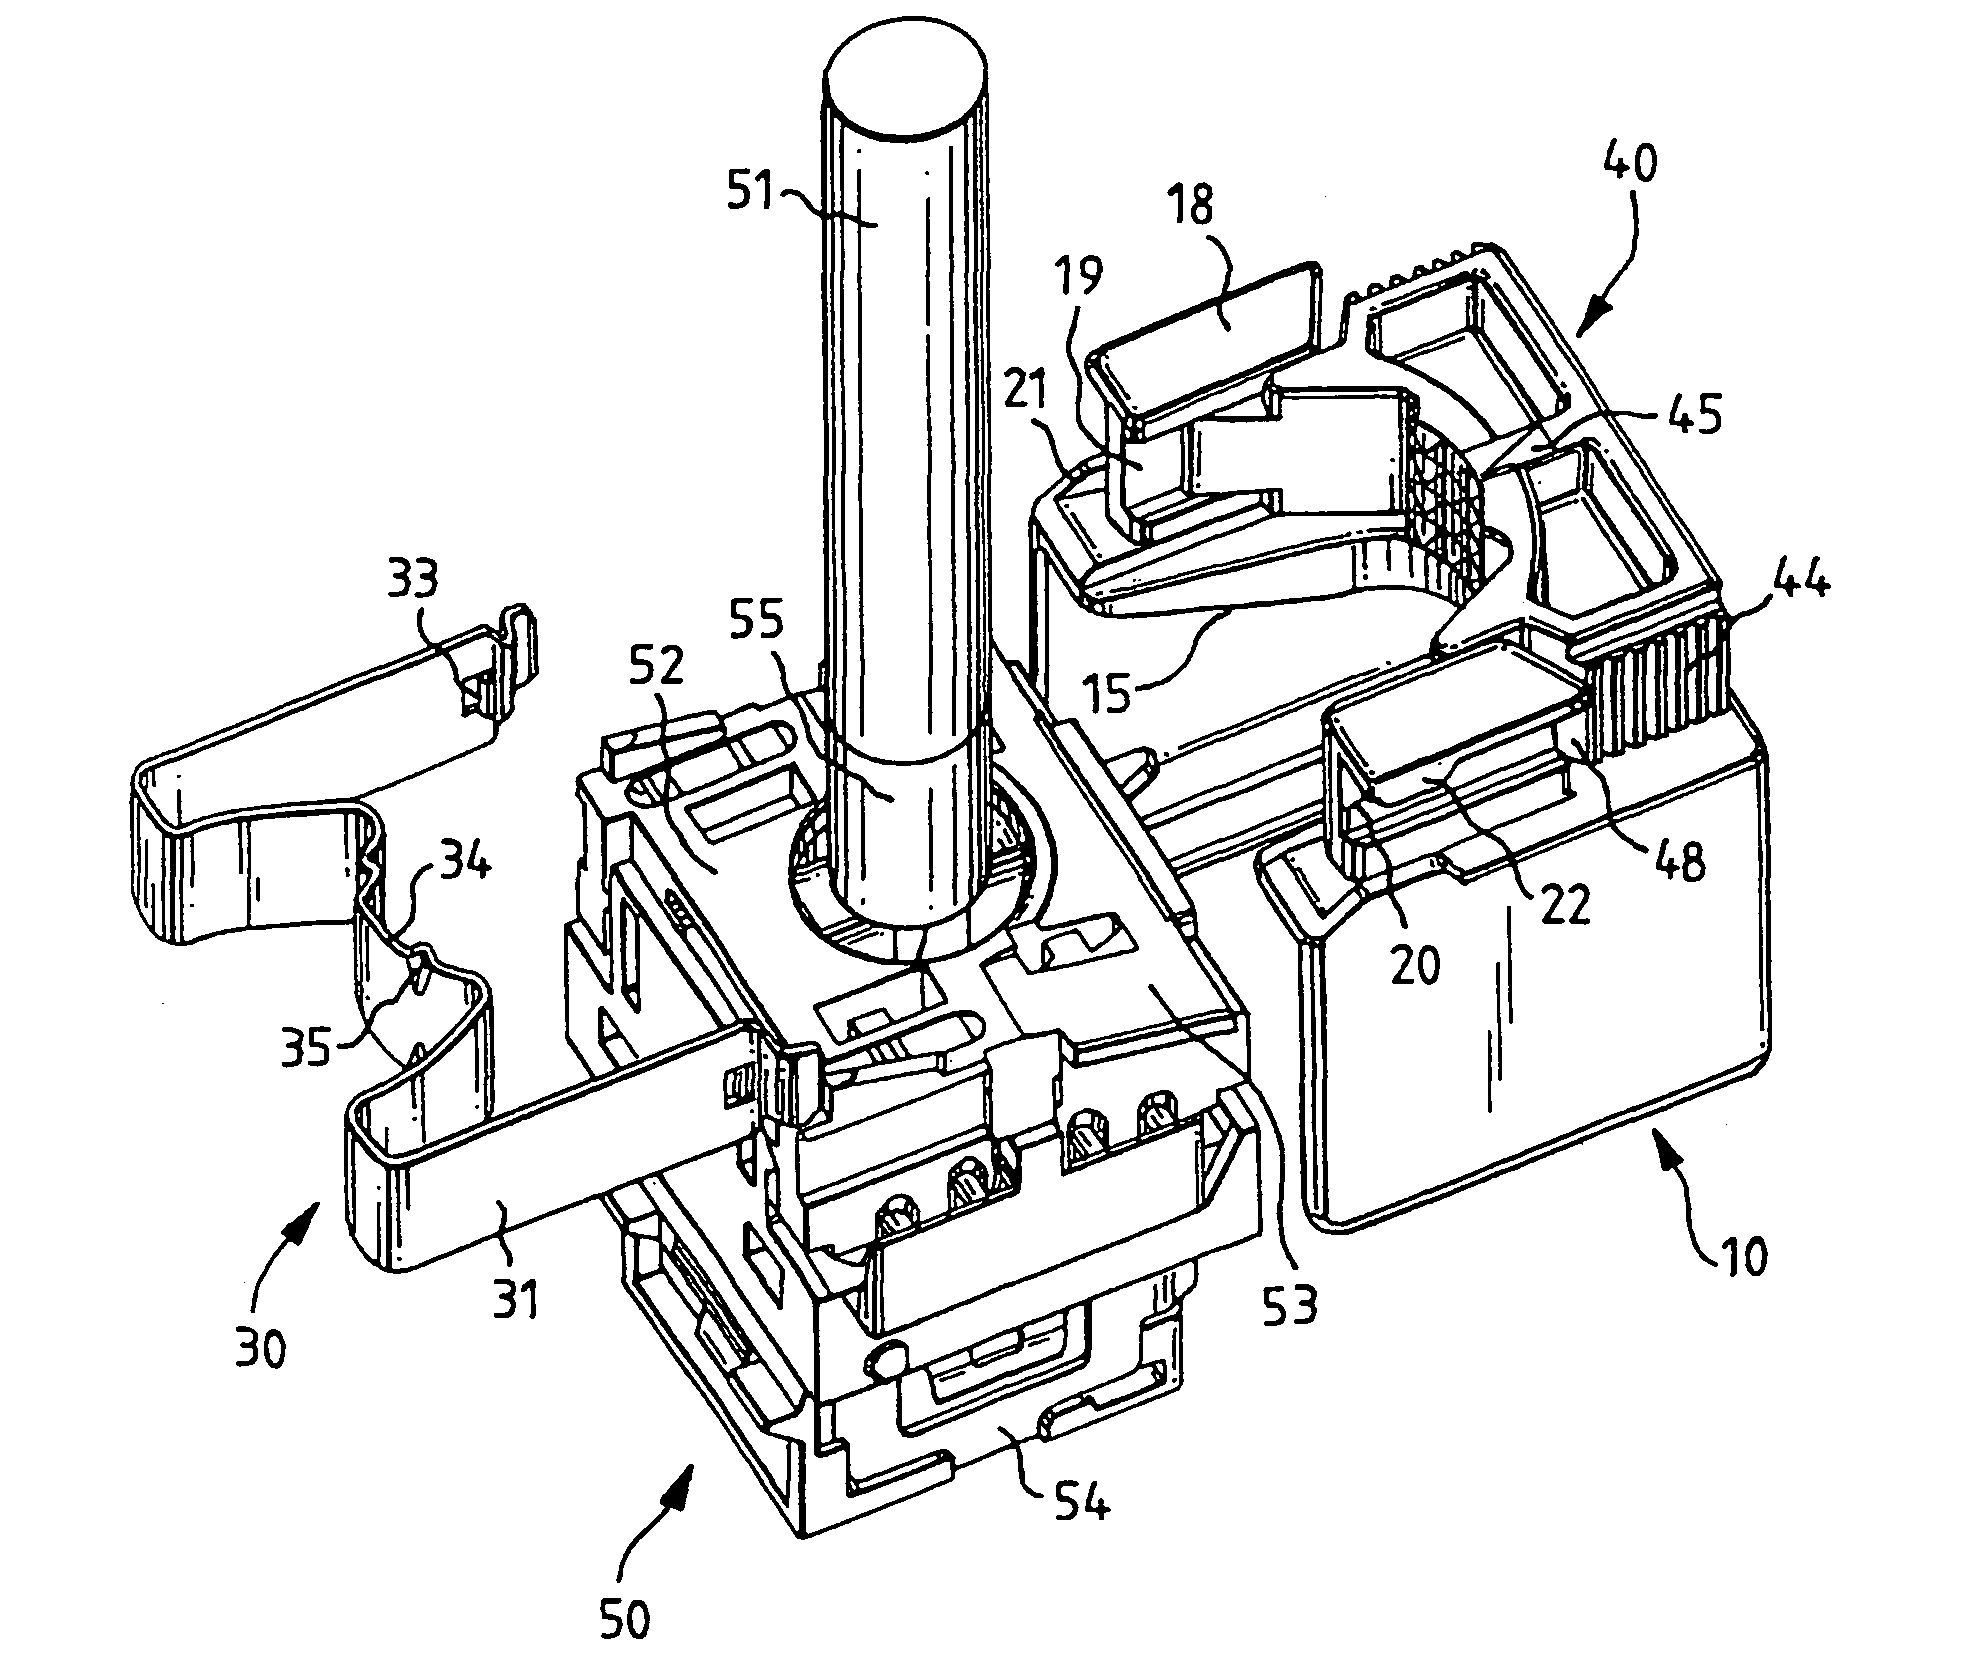 Strain-relief device for a plug-in connection in communications and data systems